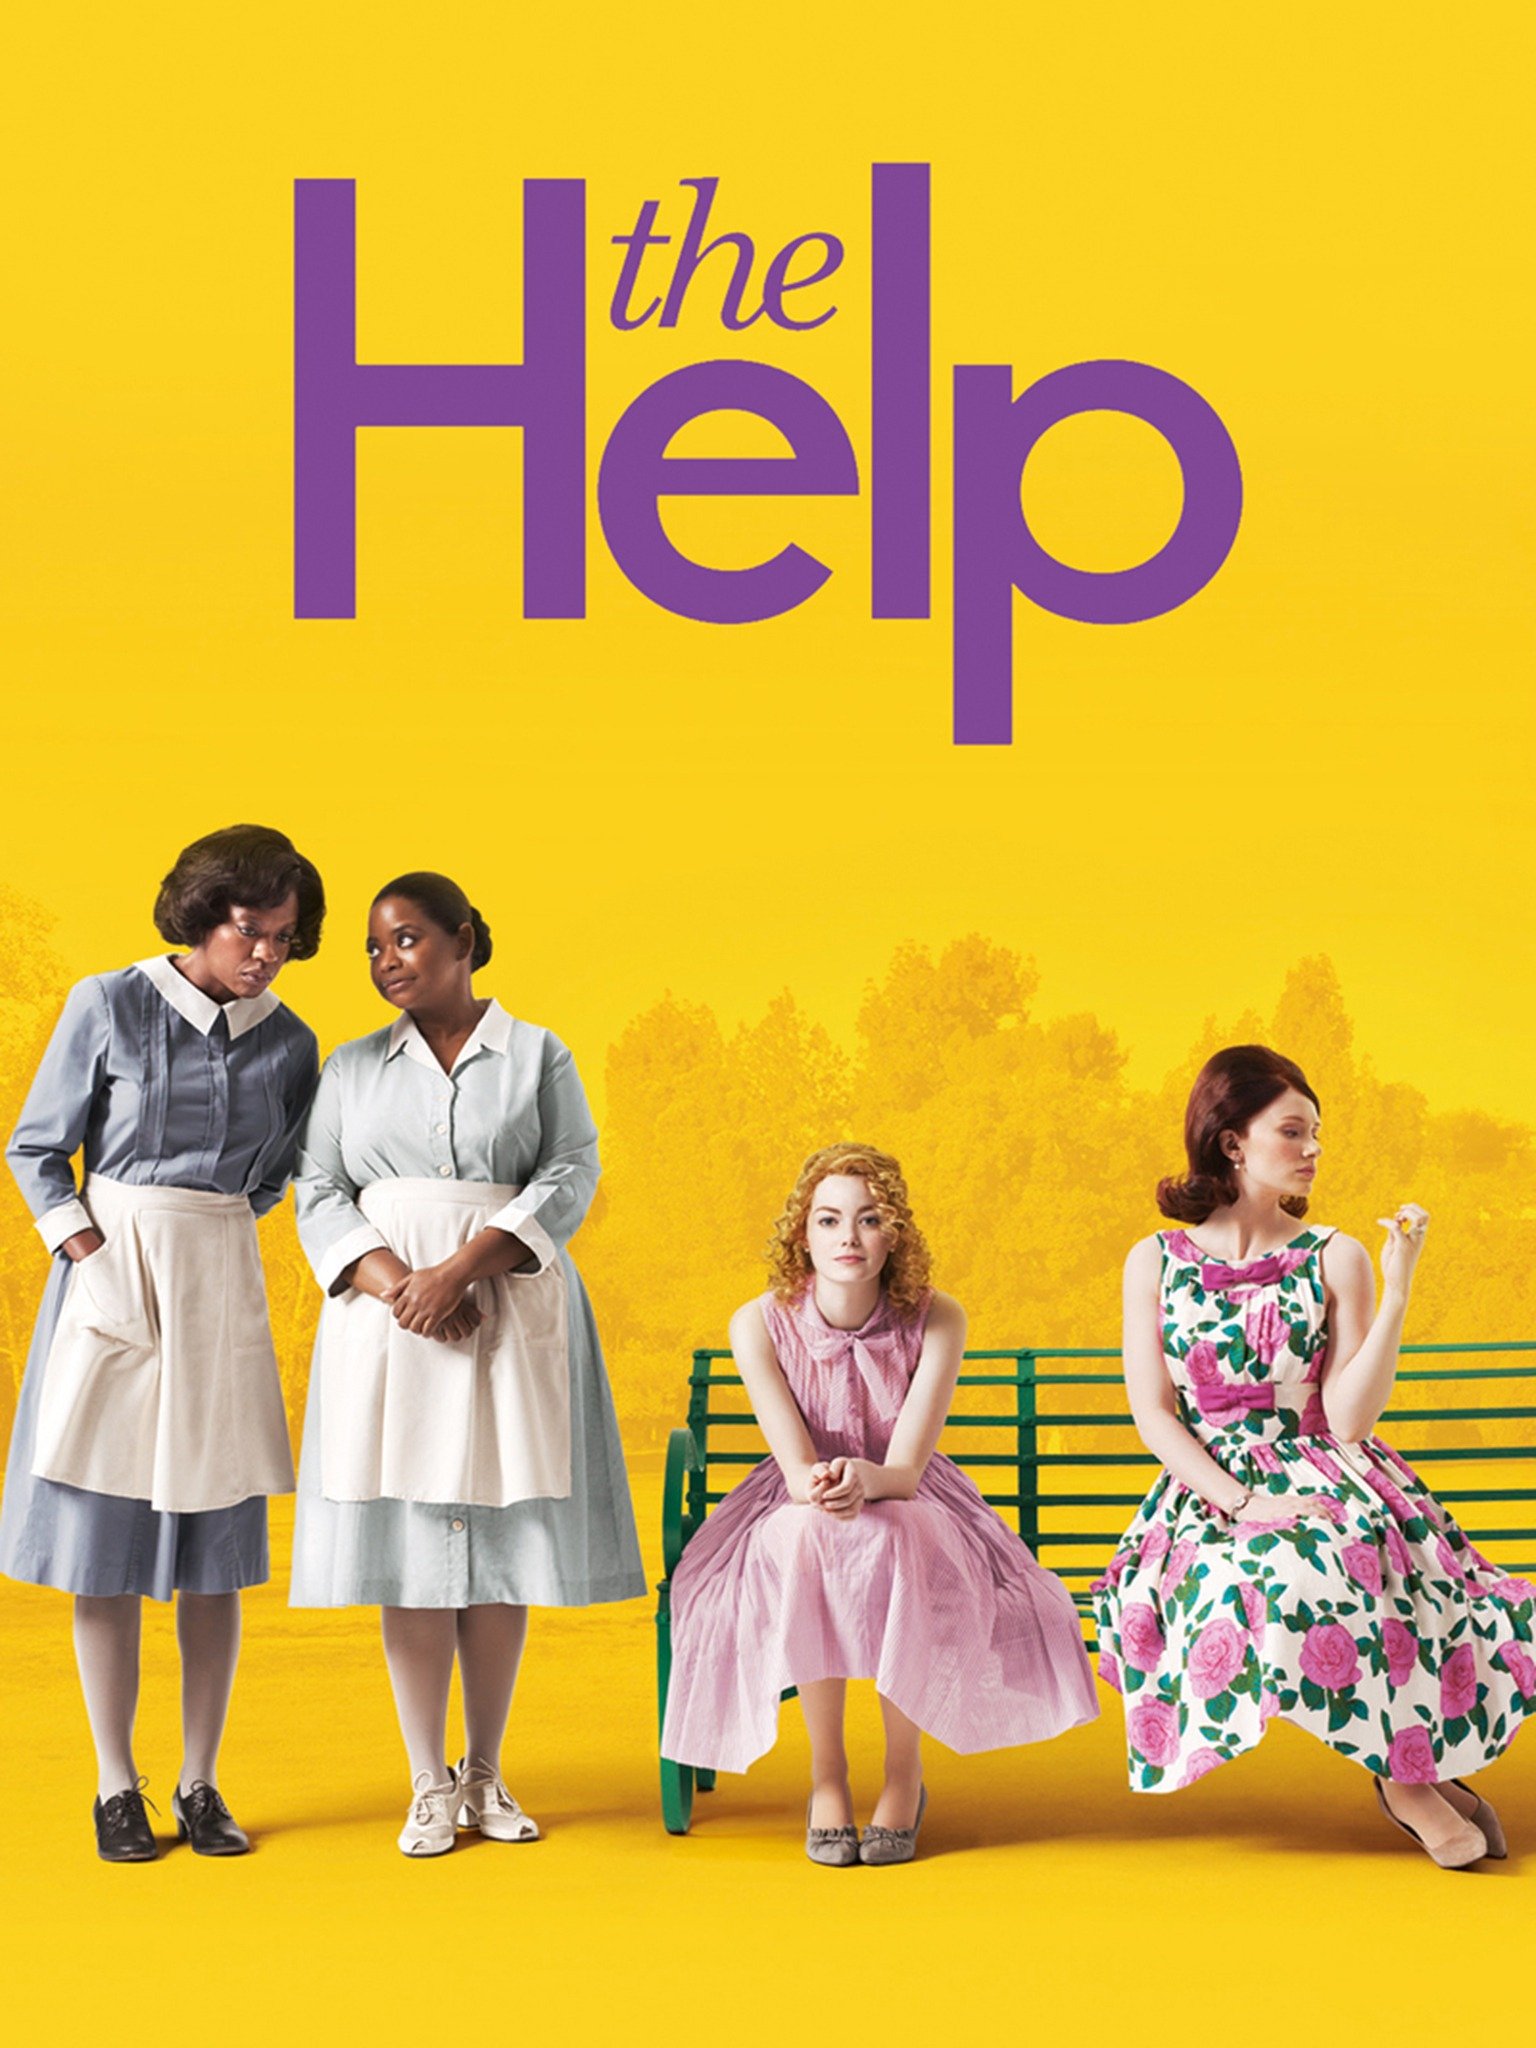 Cover Art for the help